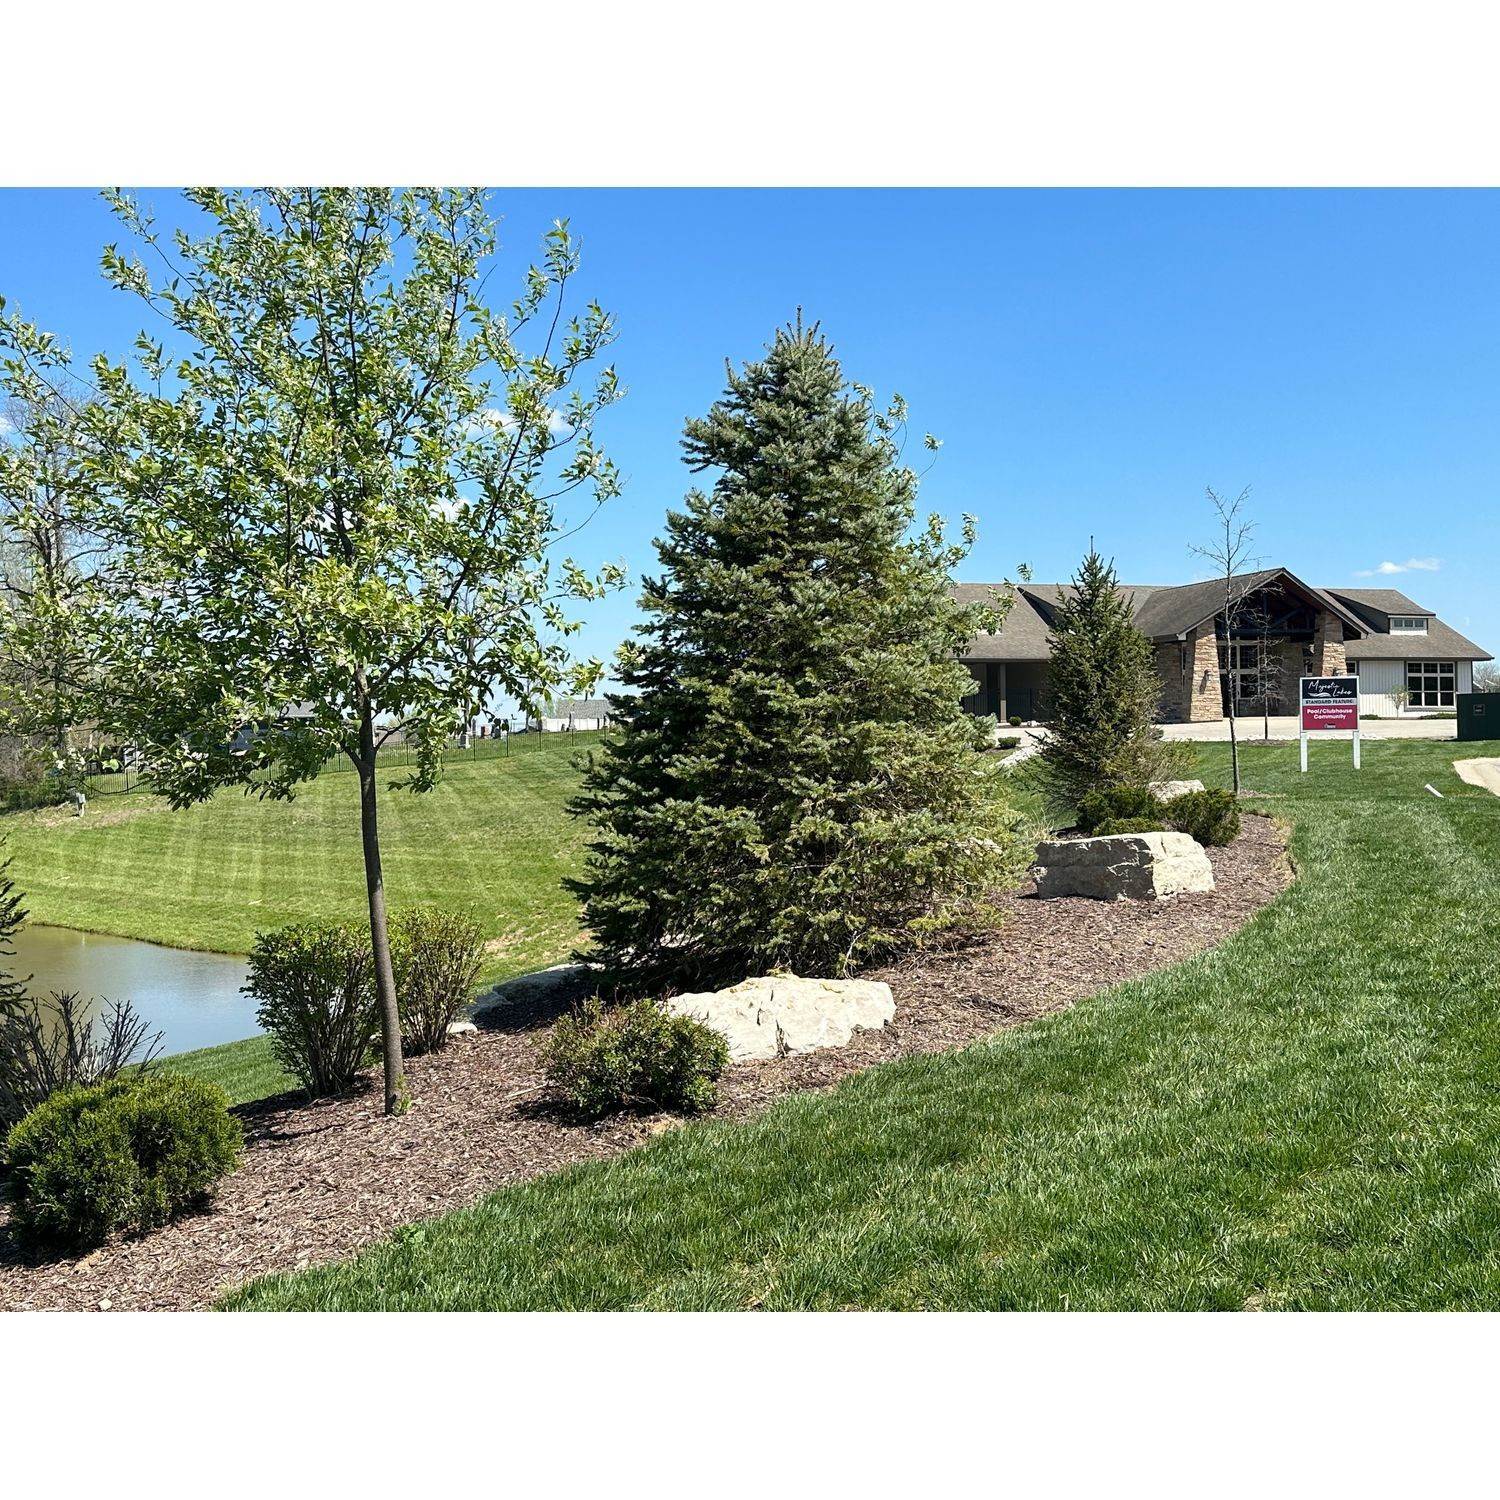 6. Majestic Lakes bâtiment à 3 Hammerstone Ct, Moscow Mills, MO 63362